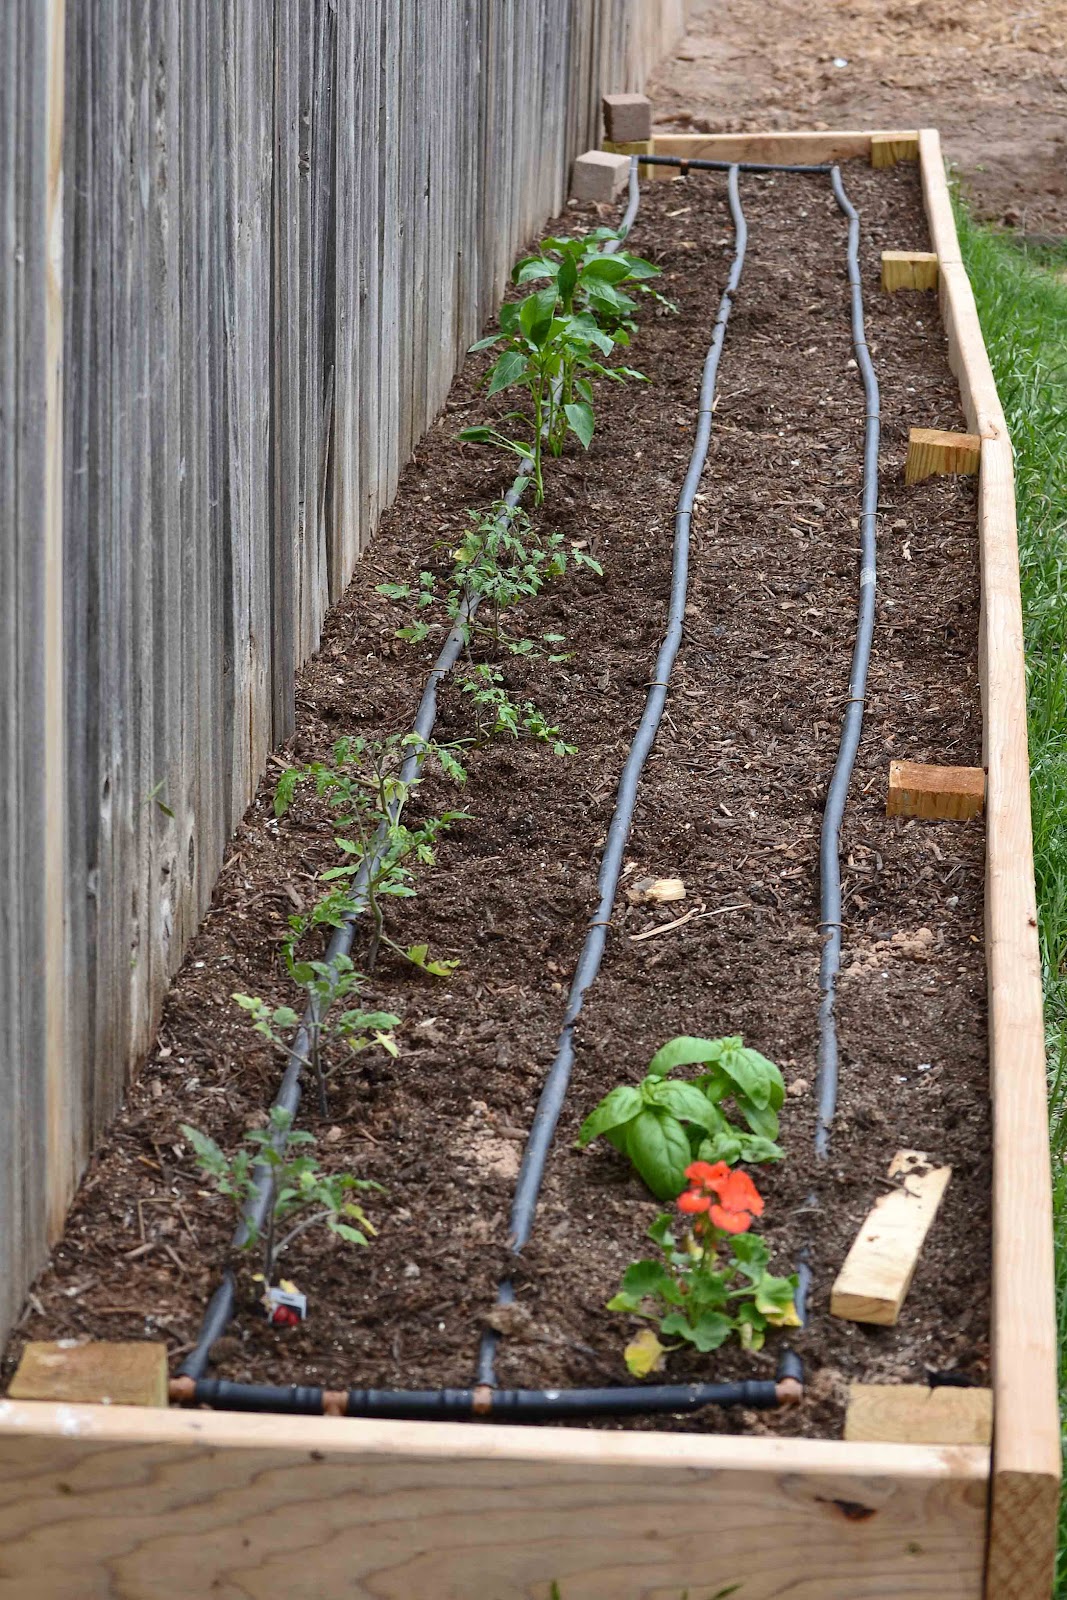 Babblings and More: Square Foot Garden- Planting and Irrigation